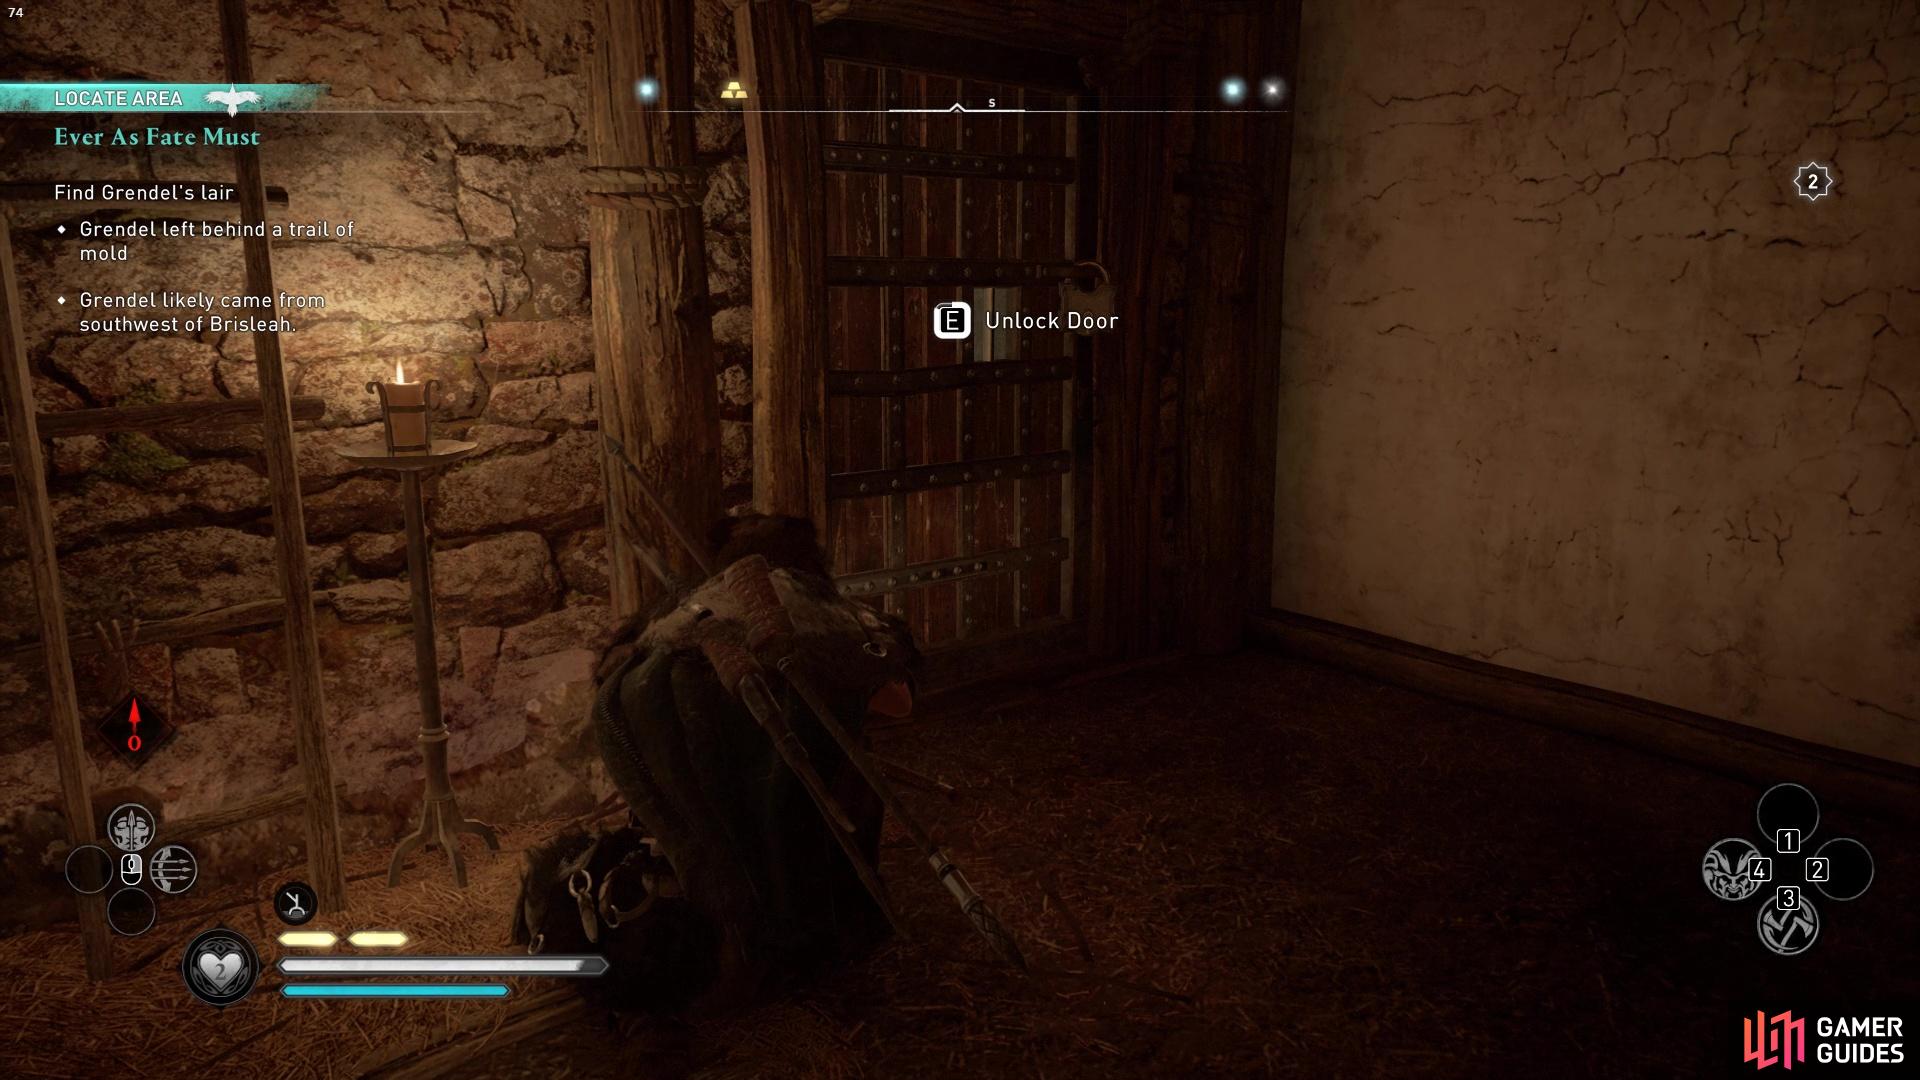 Then, use it to unlock the basement door to get to the chest.